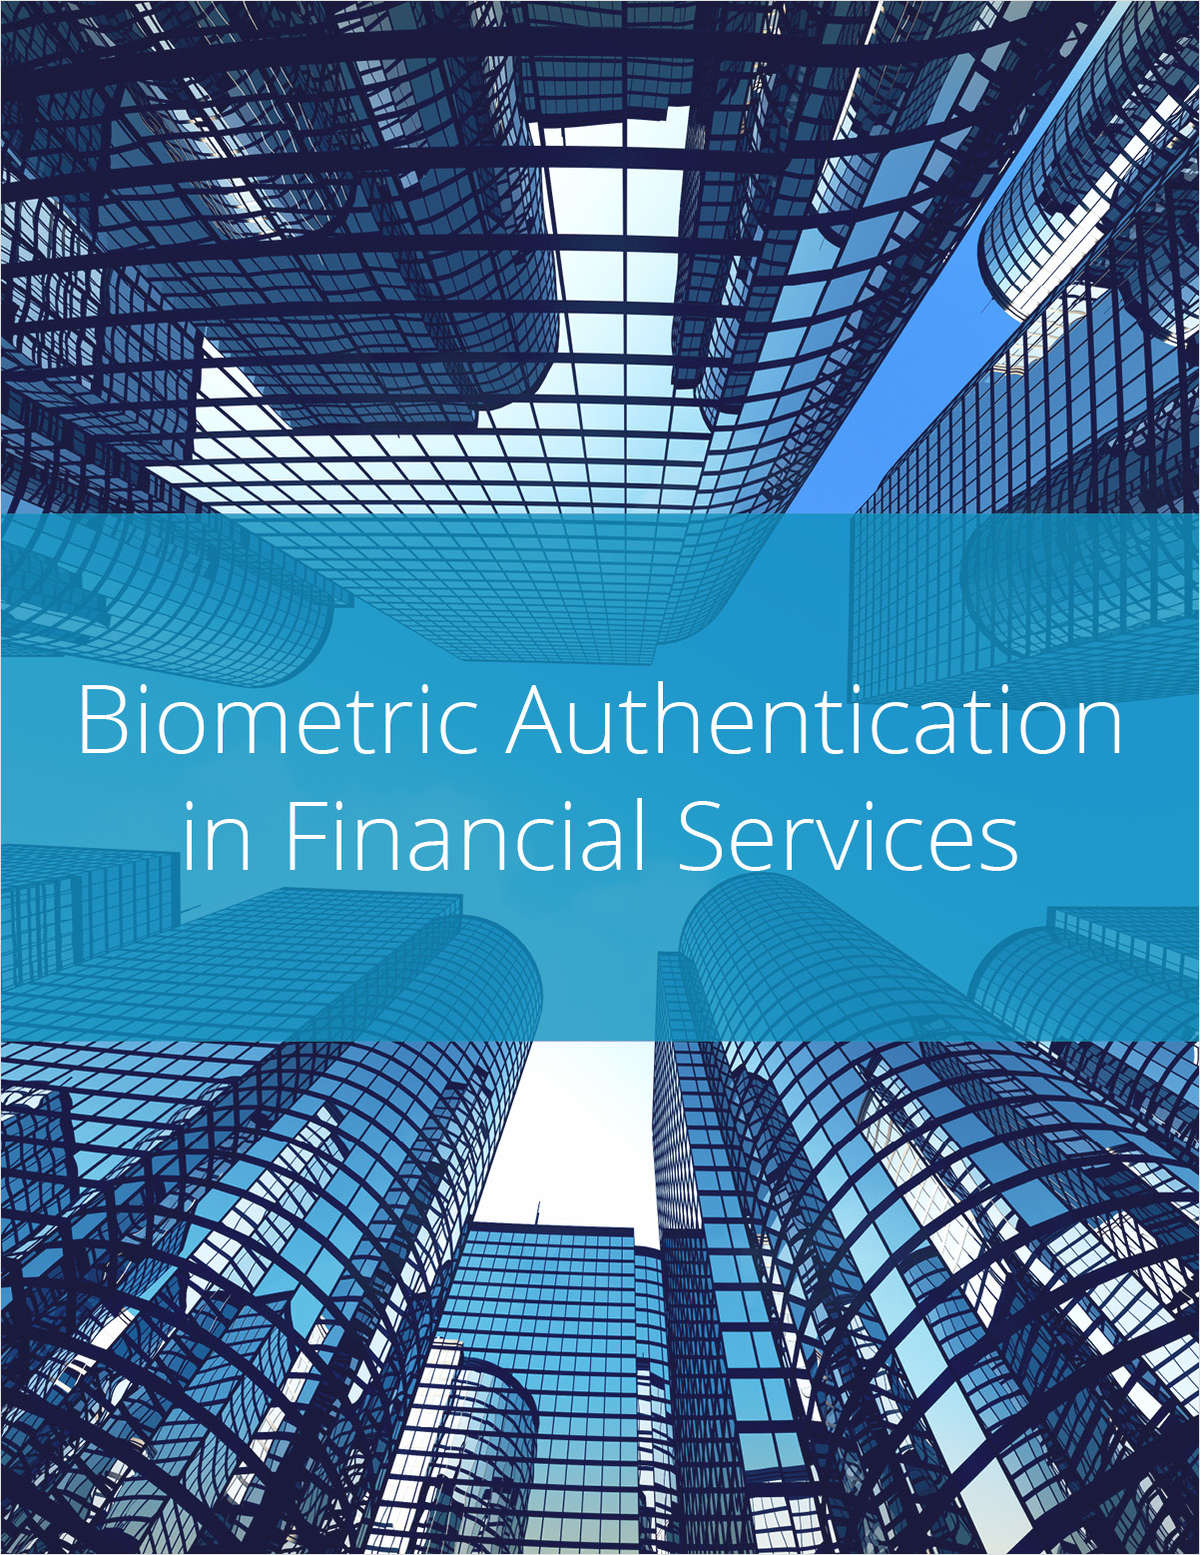 Biometric Authentication in Financial Services